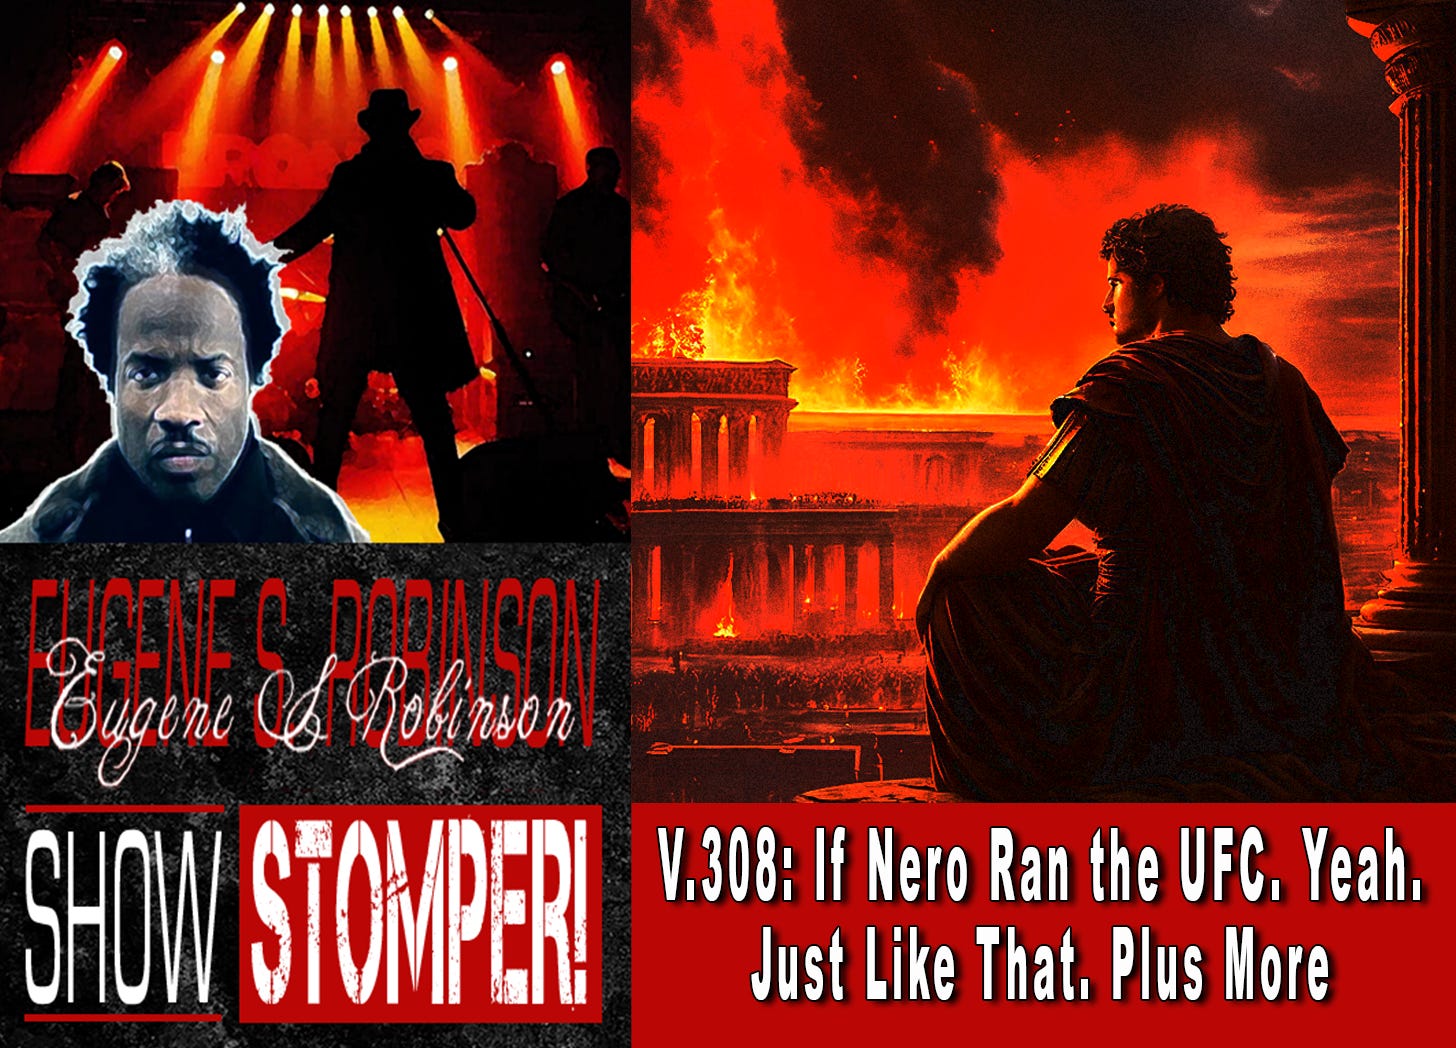 V.308: If Nero Ran the UFC. Yeah. Just Like That. Plus More On The Eugene S. Robinson Show Stomper!